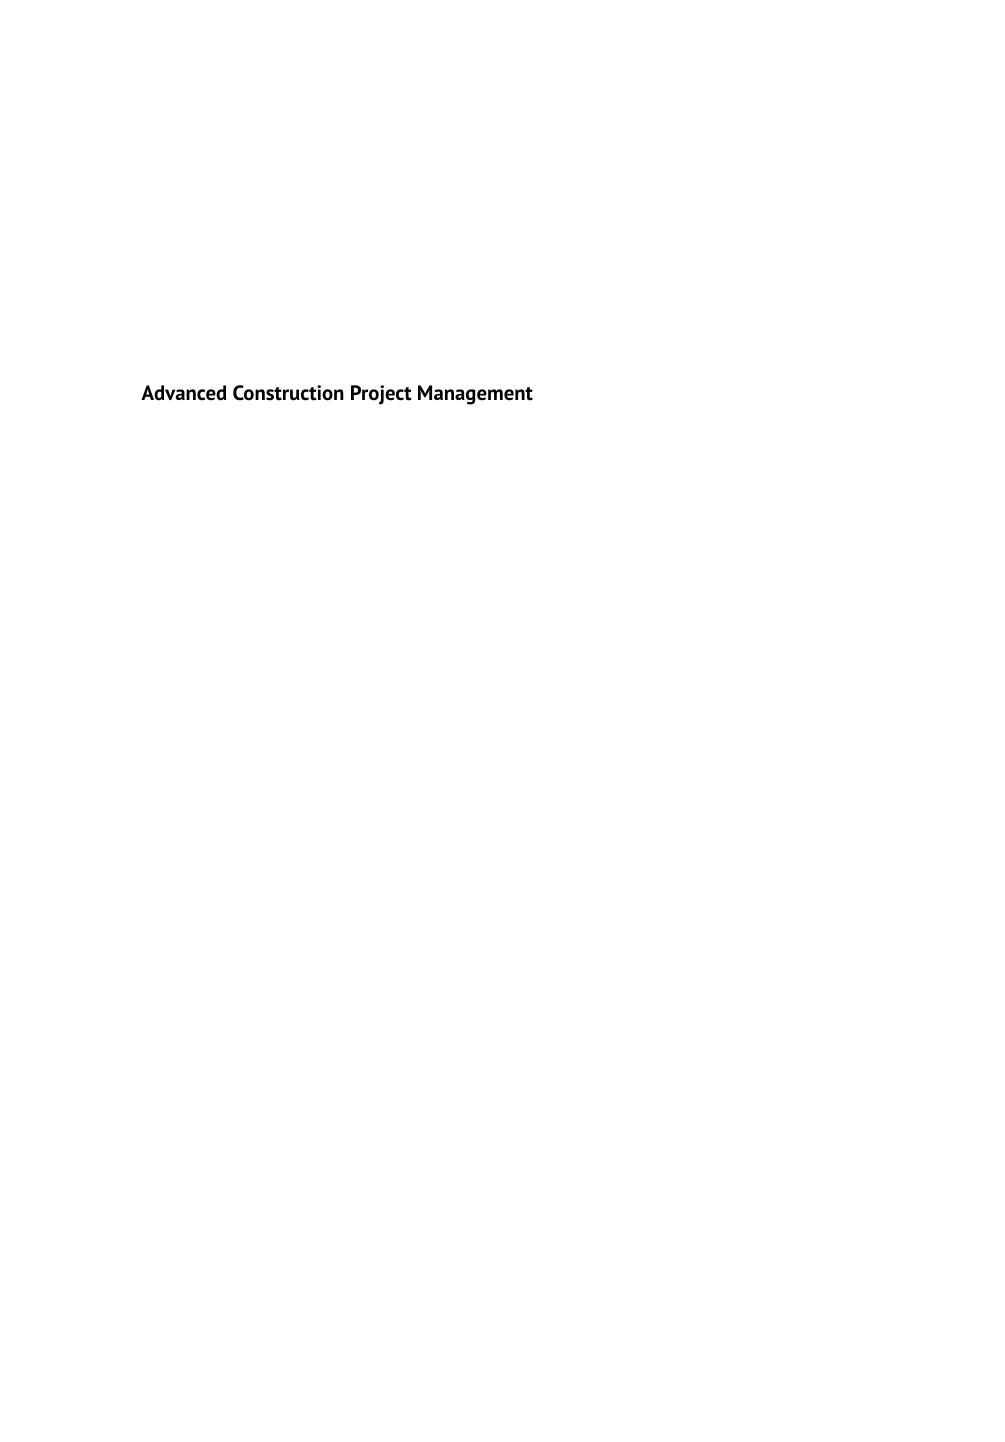 Advanced Construction Project Management  The Complexity of Megaprojects, (2020)